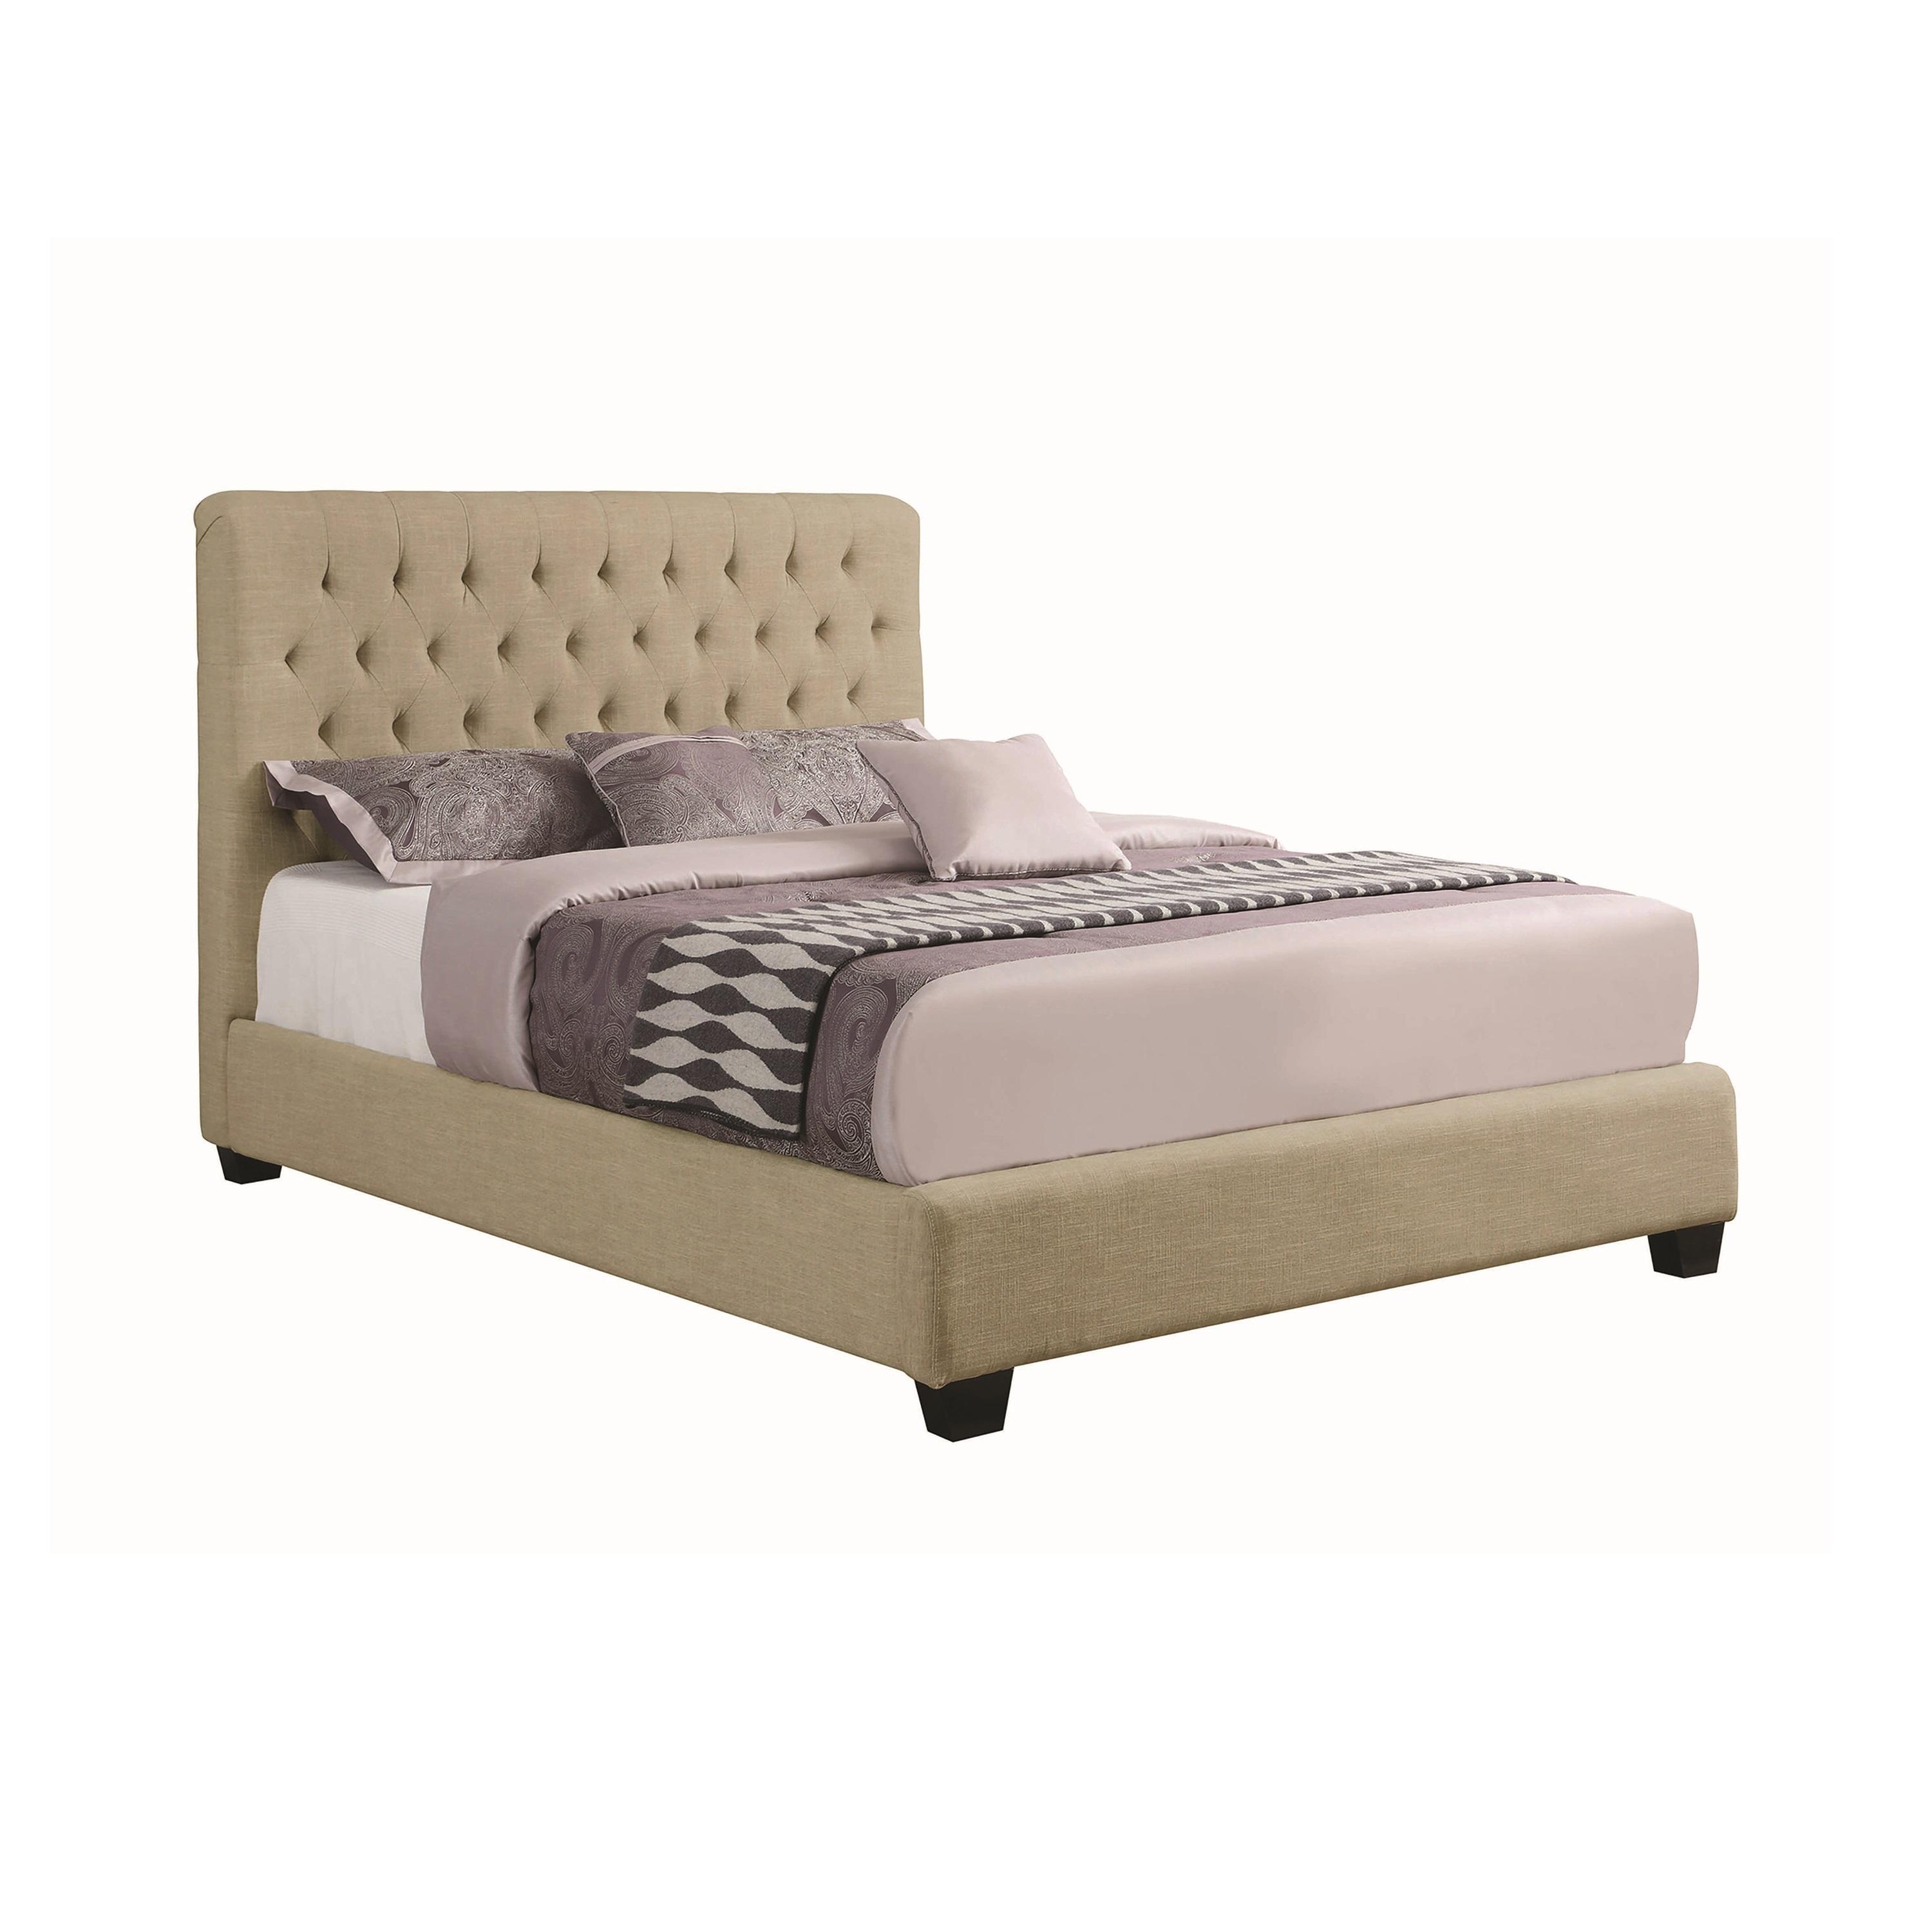 

    
Contemporary Oatmeal Fabric Upholstery Queen Bed Coaster 300007Q Chloe
